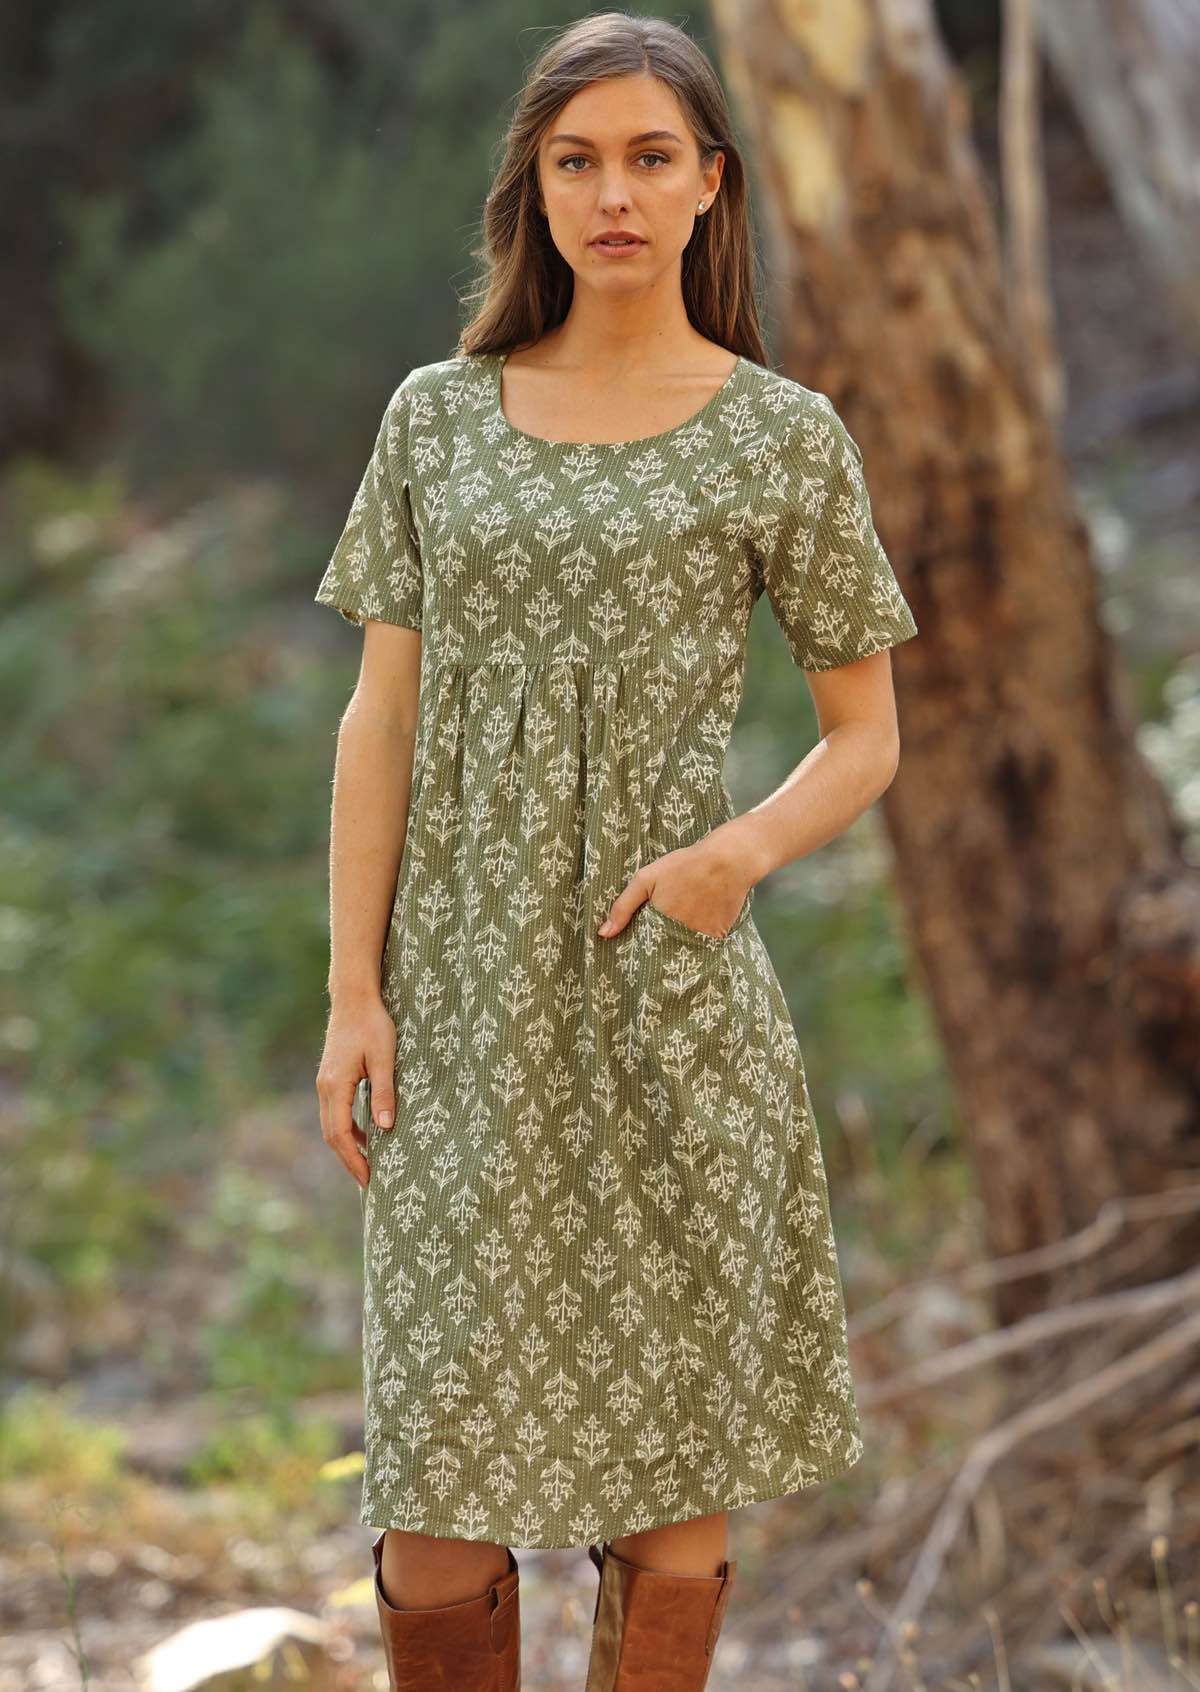 Lightweight cotton dress with T-shirt sleeves and pockets